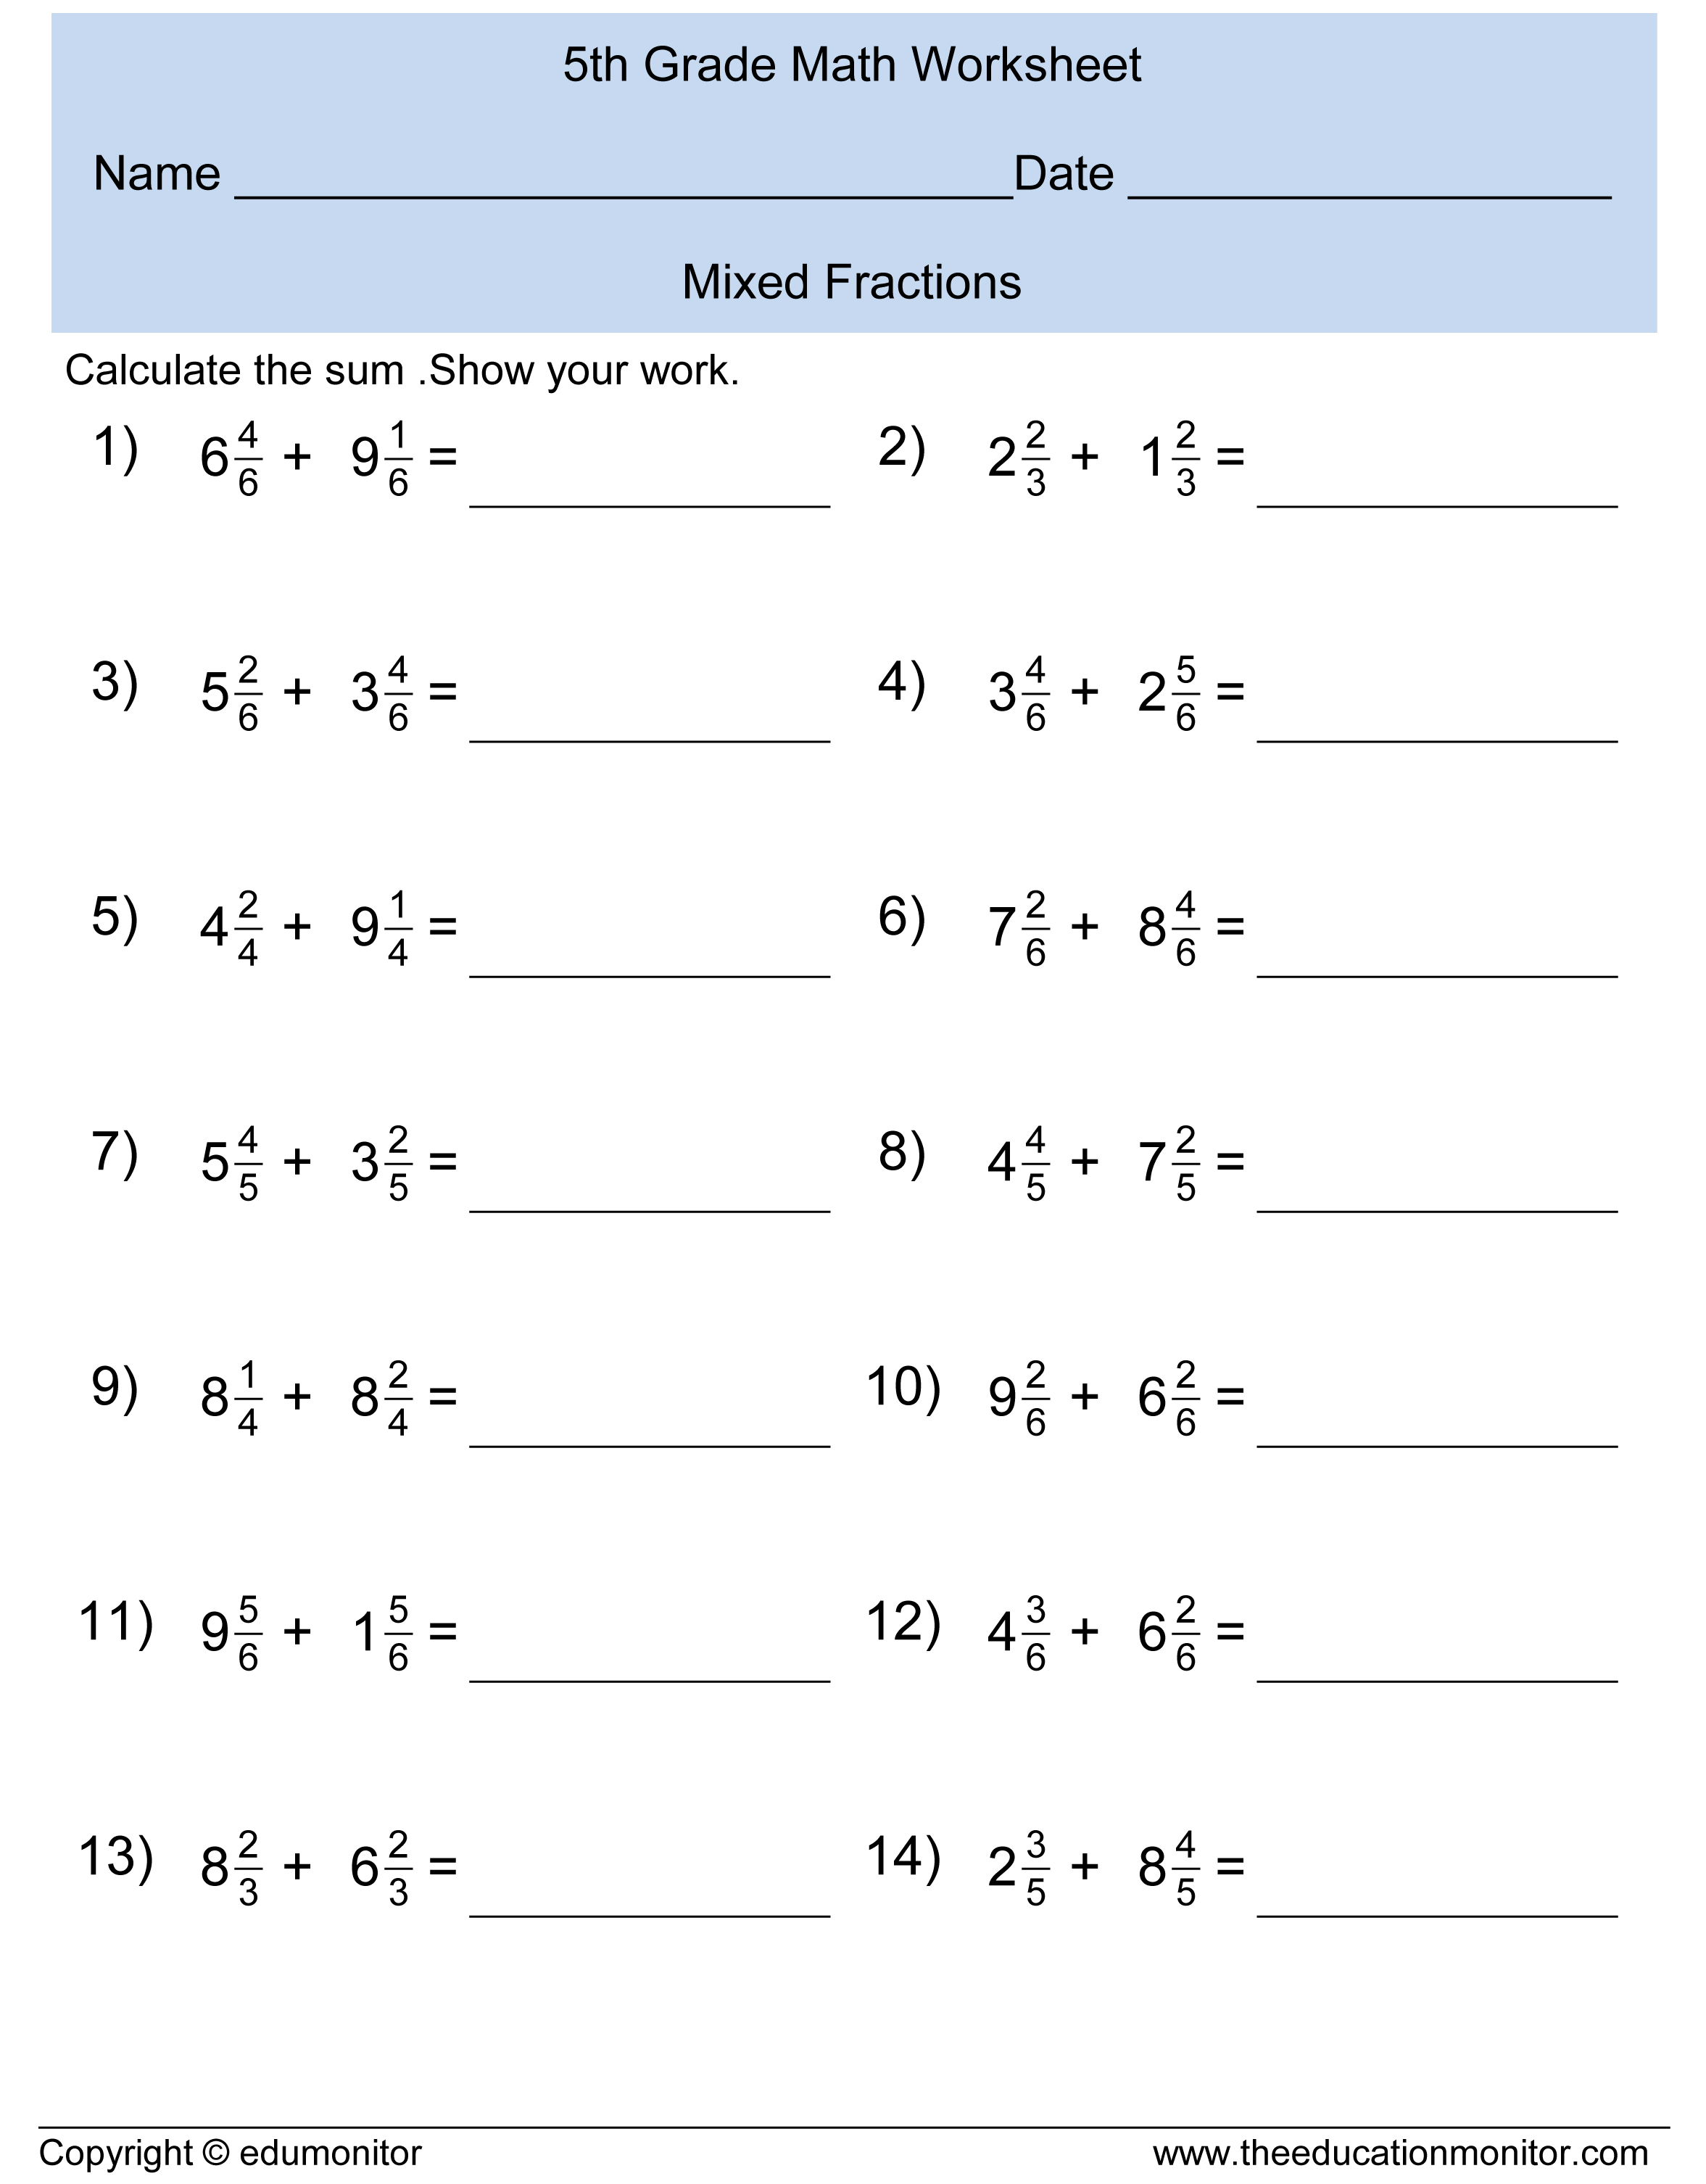 Mixed Fractions Worksheet for 5th Graders